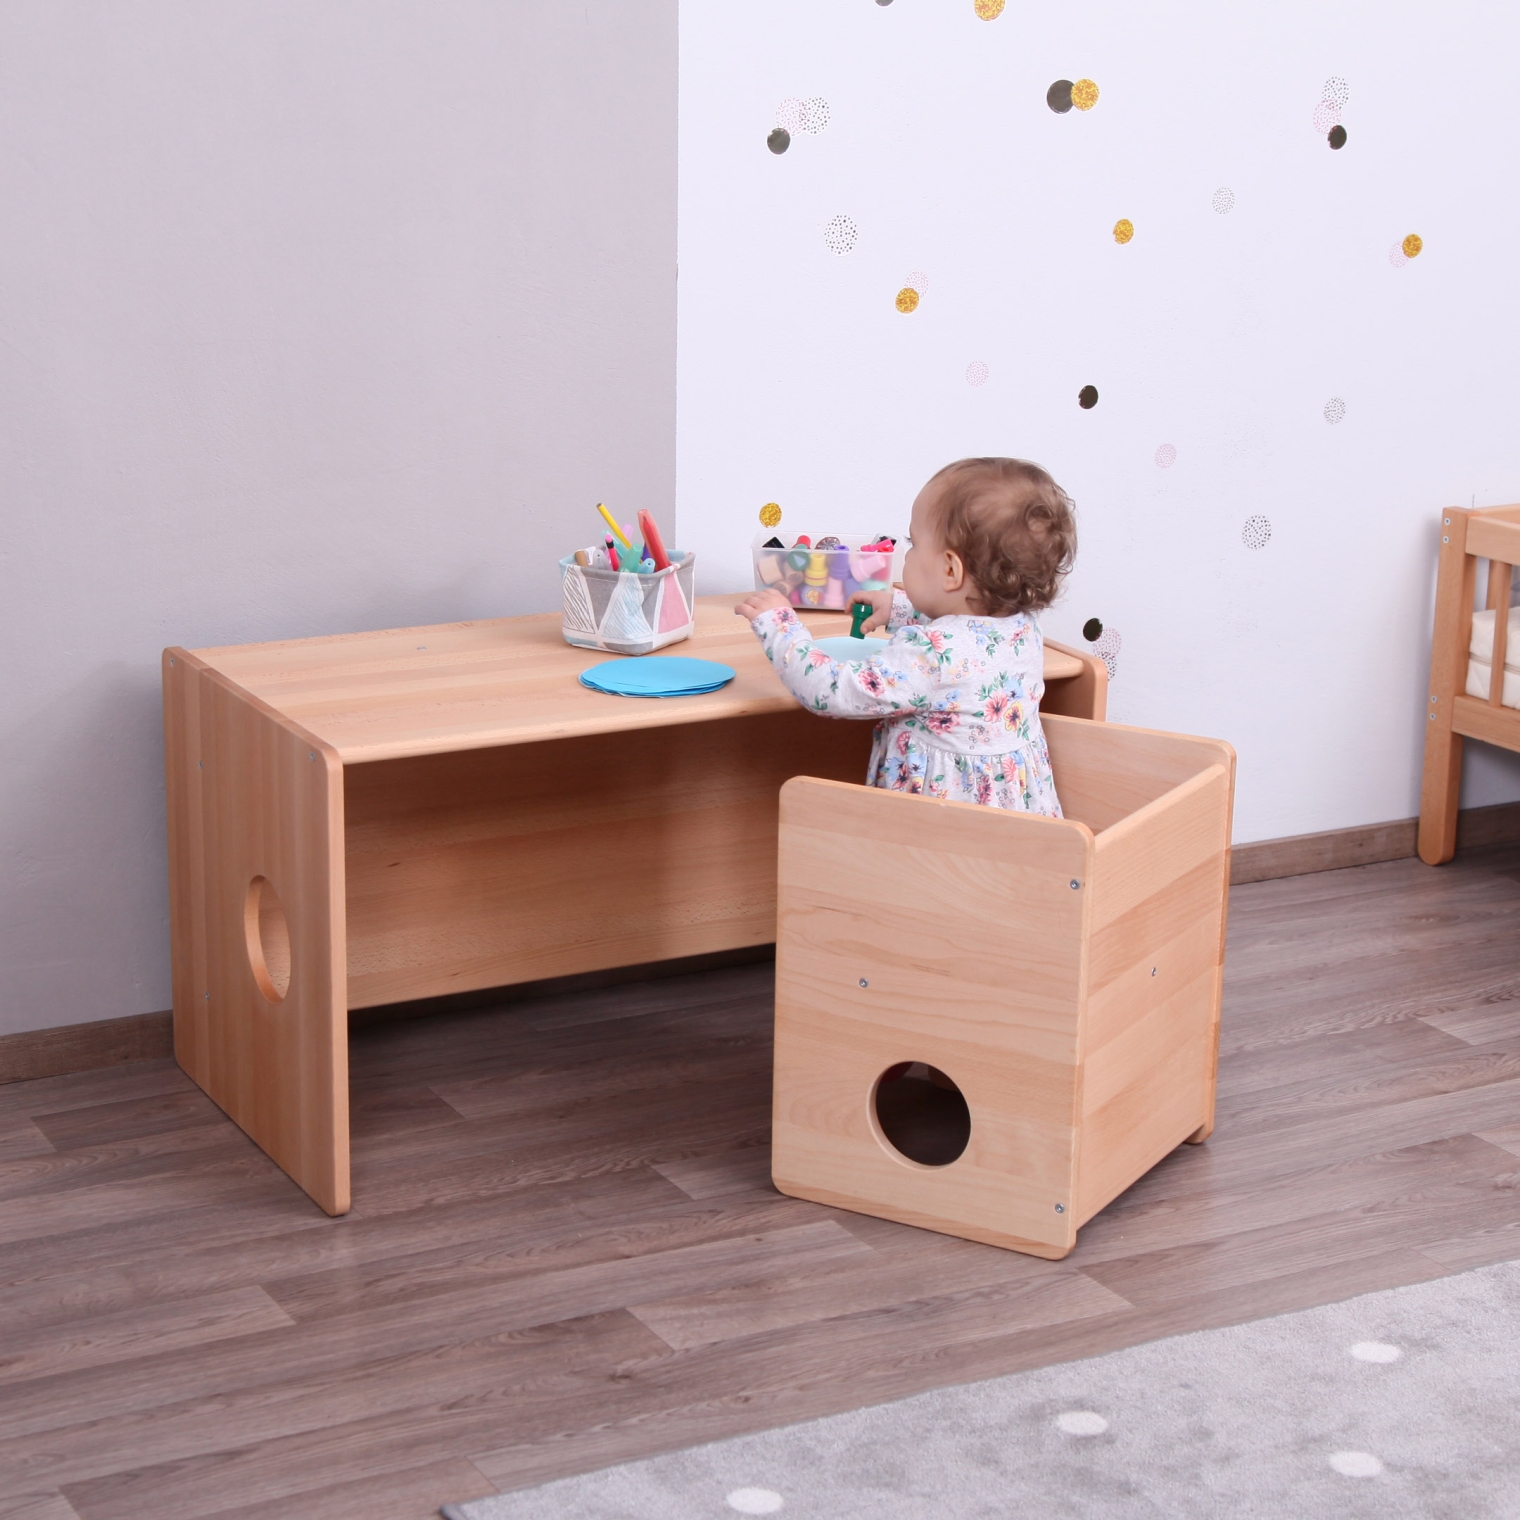 Montessori cUbe chair and table 2+3